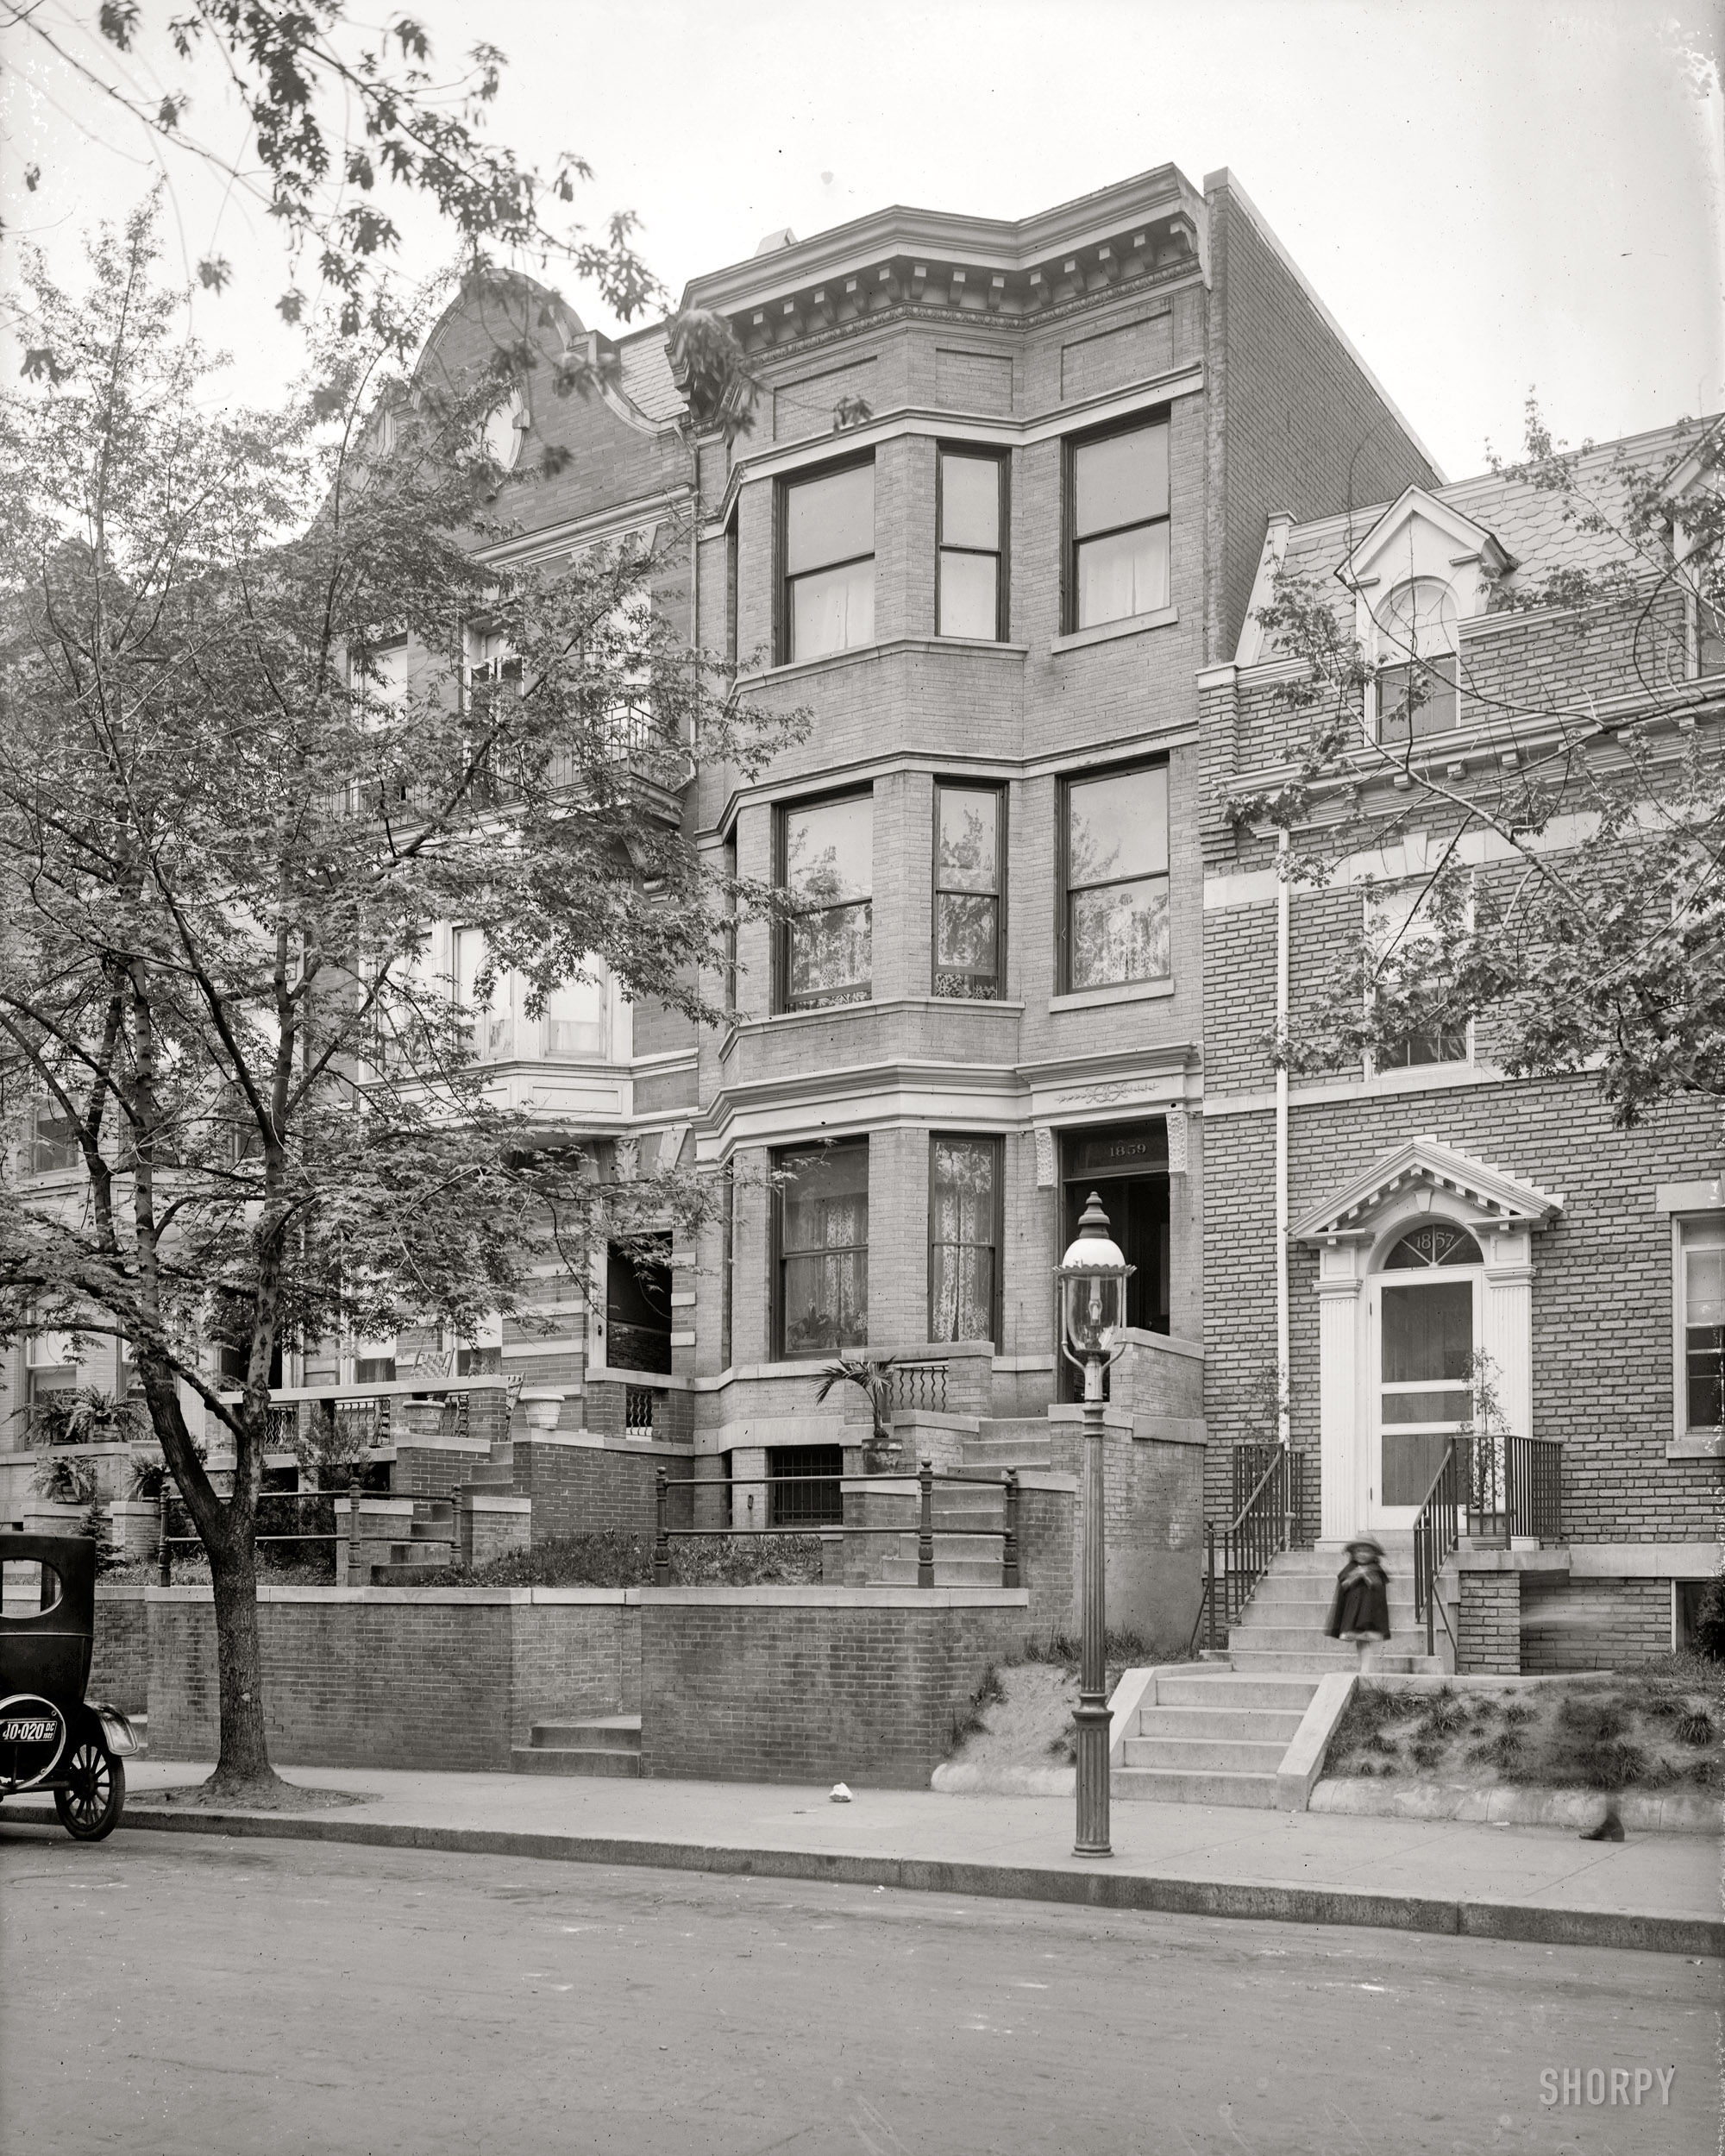 Washington, D.C., 1922. "1859 California Street." National Photo Co. glass negative. (Update: This house is on the market for $1.55 million.) View full size.